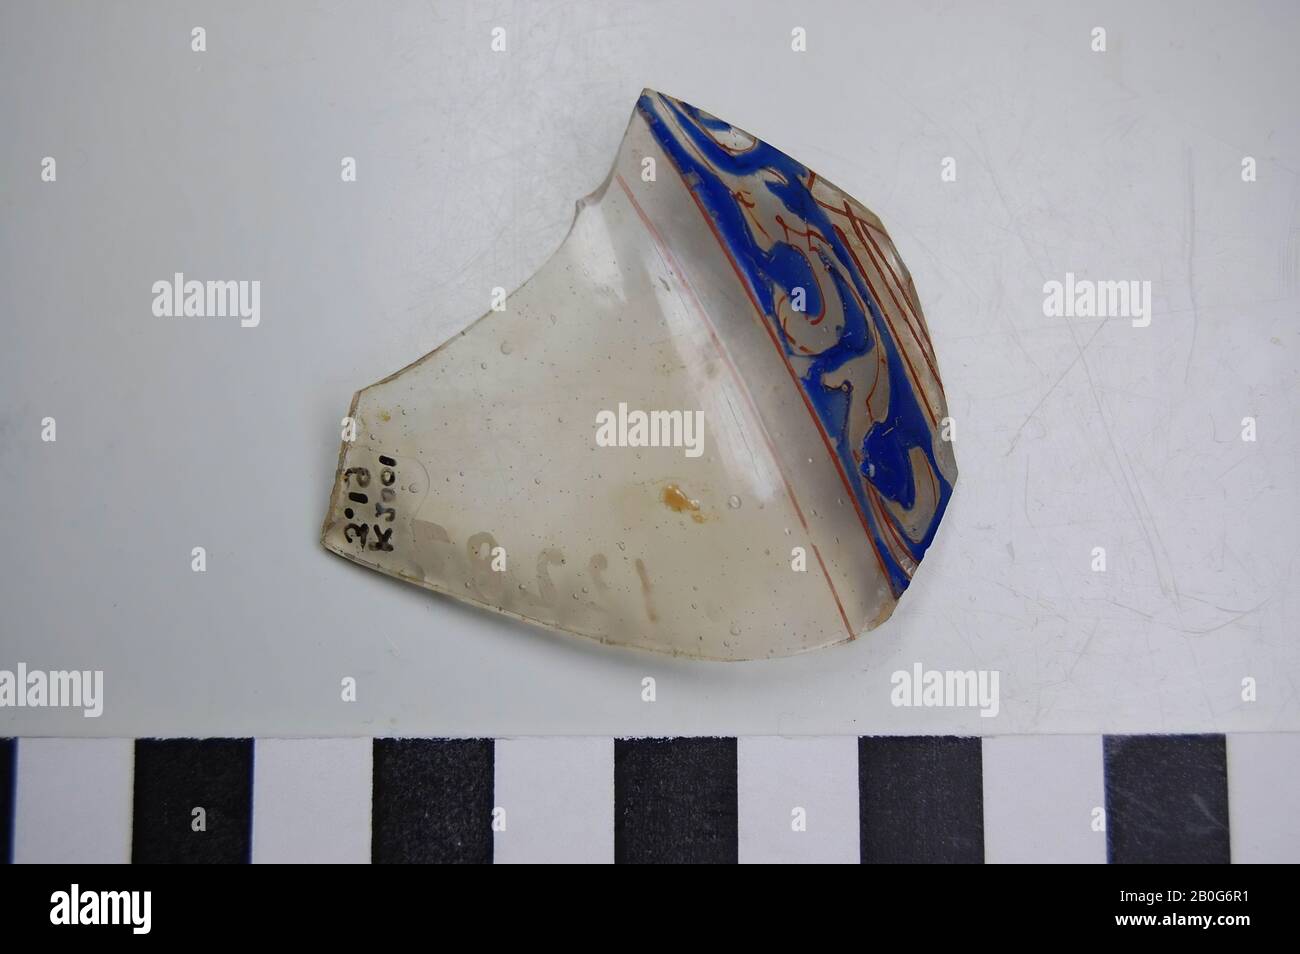 Glass shard with blue, red and gold decoration. Transparent glass with air bubbles. Old inventory number: 12287., shard, glass, 5.5 x 4.8 cm, Roman 50-100, unknown Stock Photo